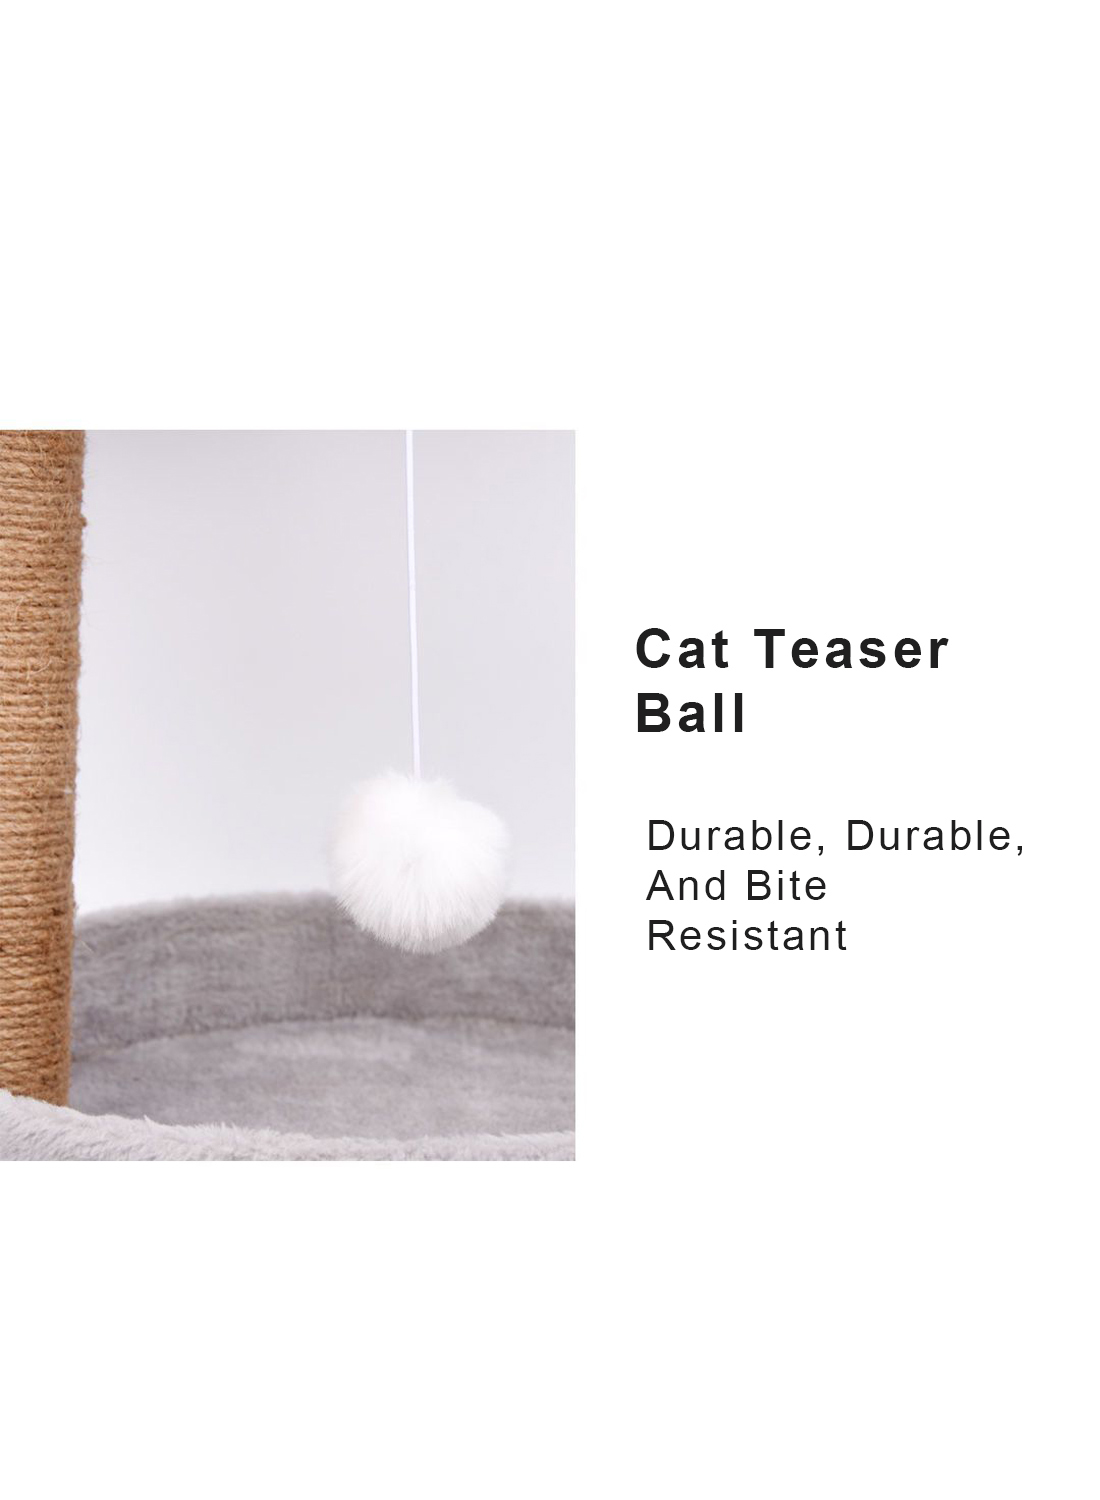 Cat Tree Cat Climbing Frame Cat Nest   Cat Daily Supplies Sisal Cat Toys With Furry Ball